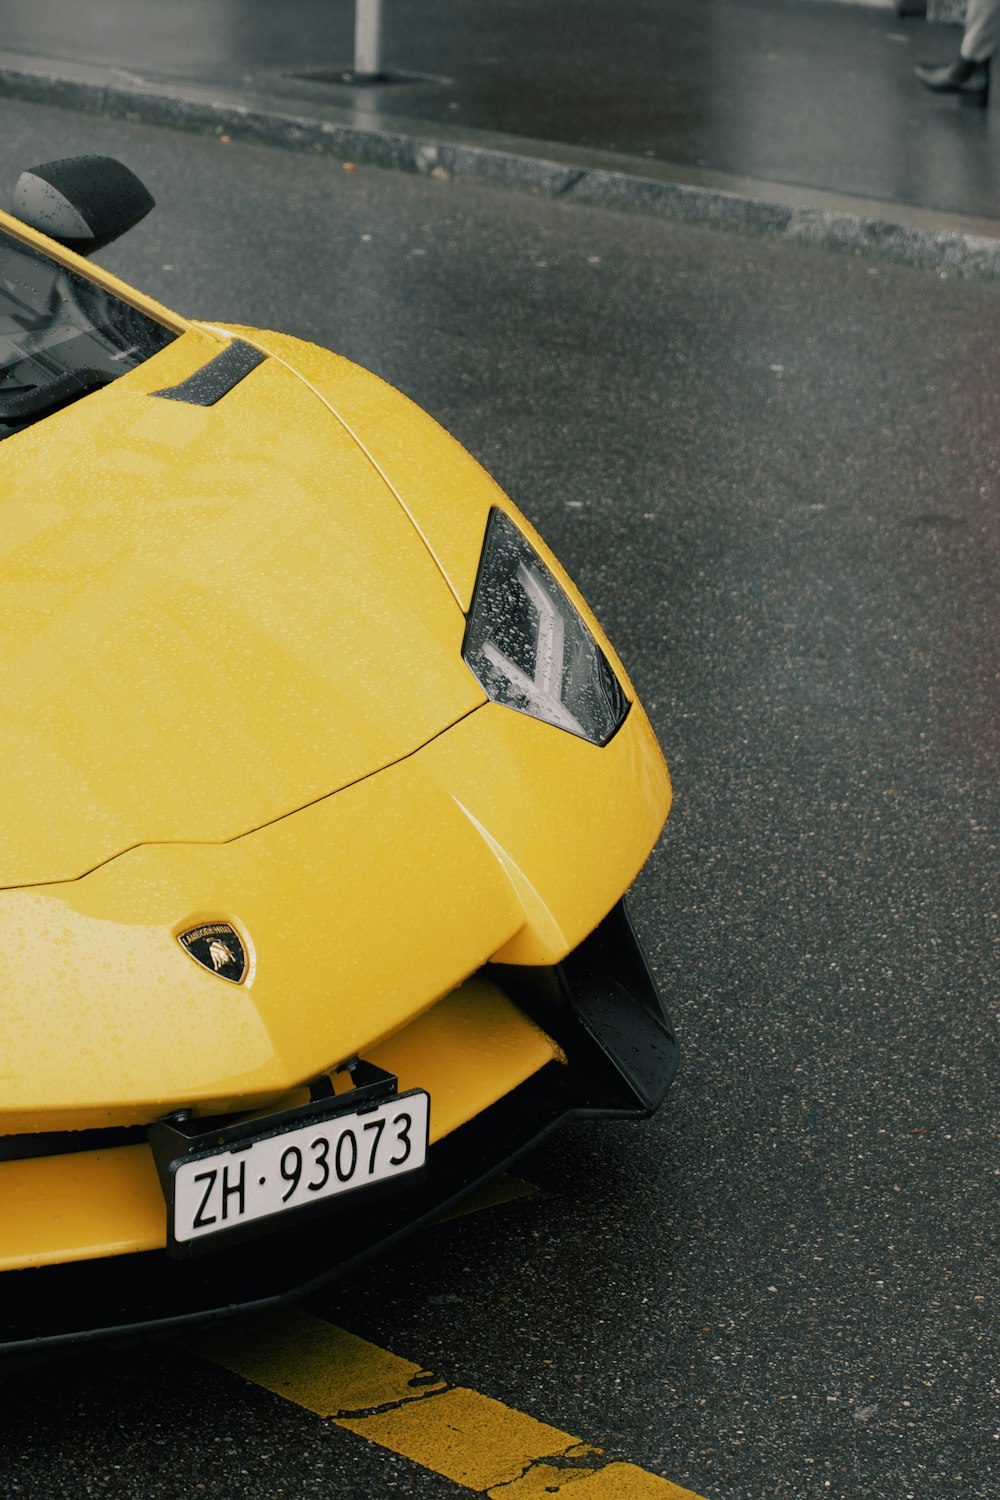 a yellow sports car parked on the side of the road